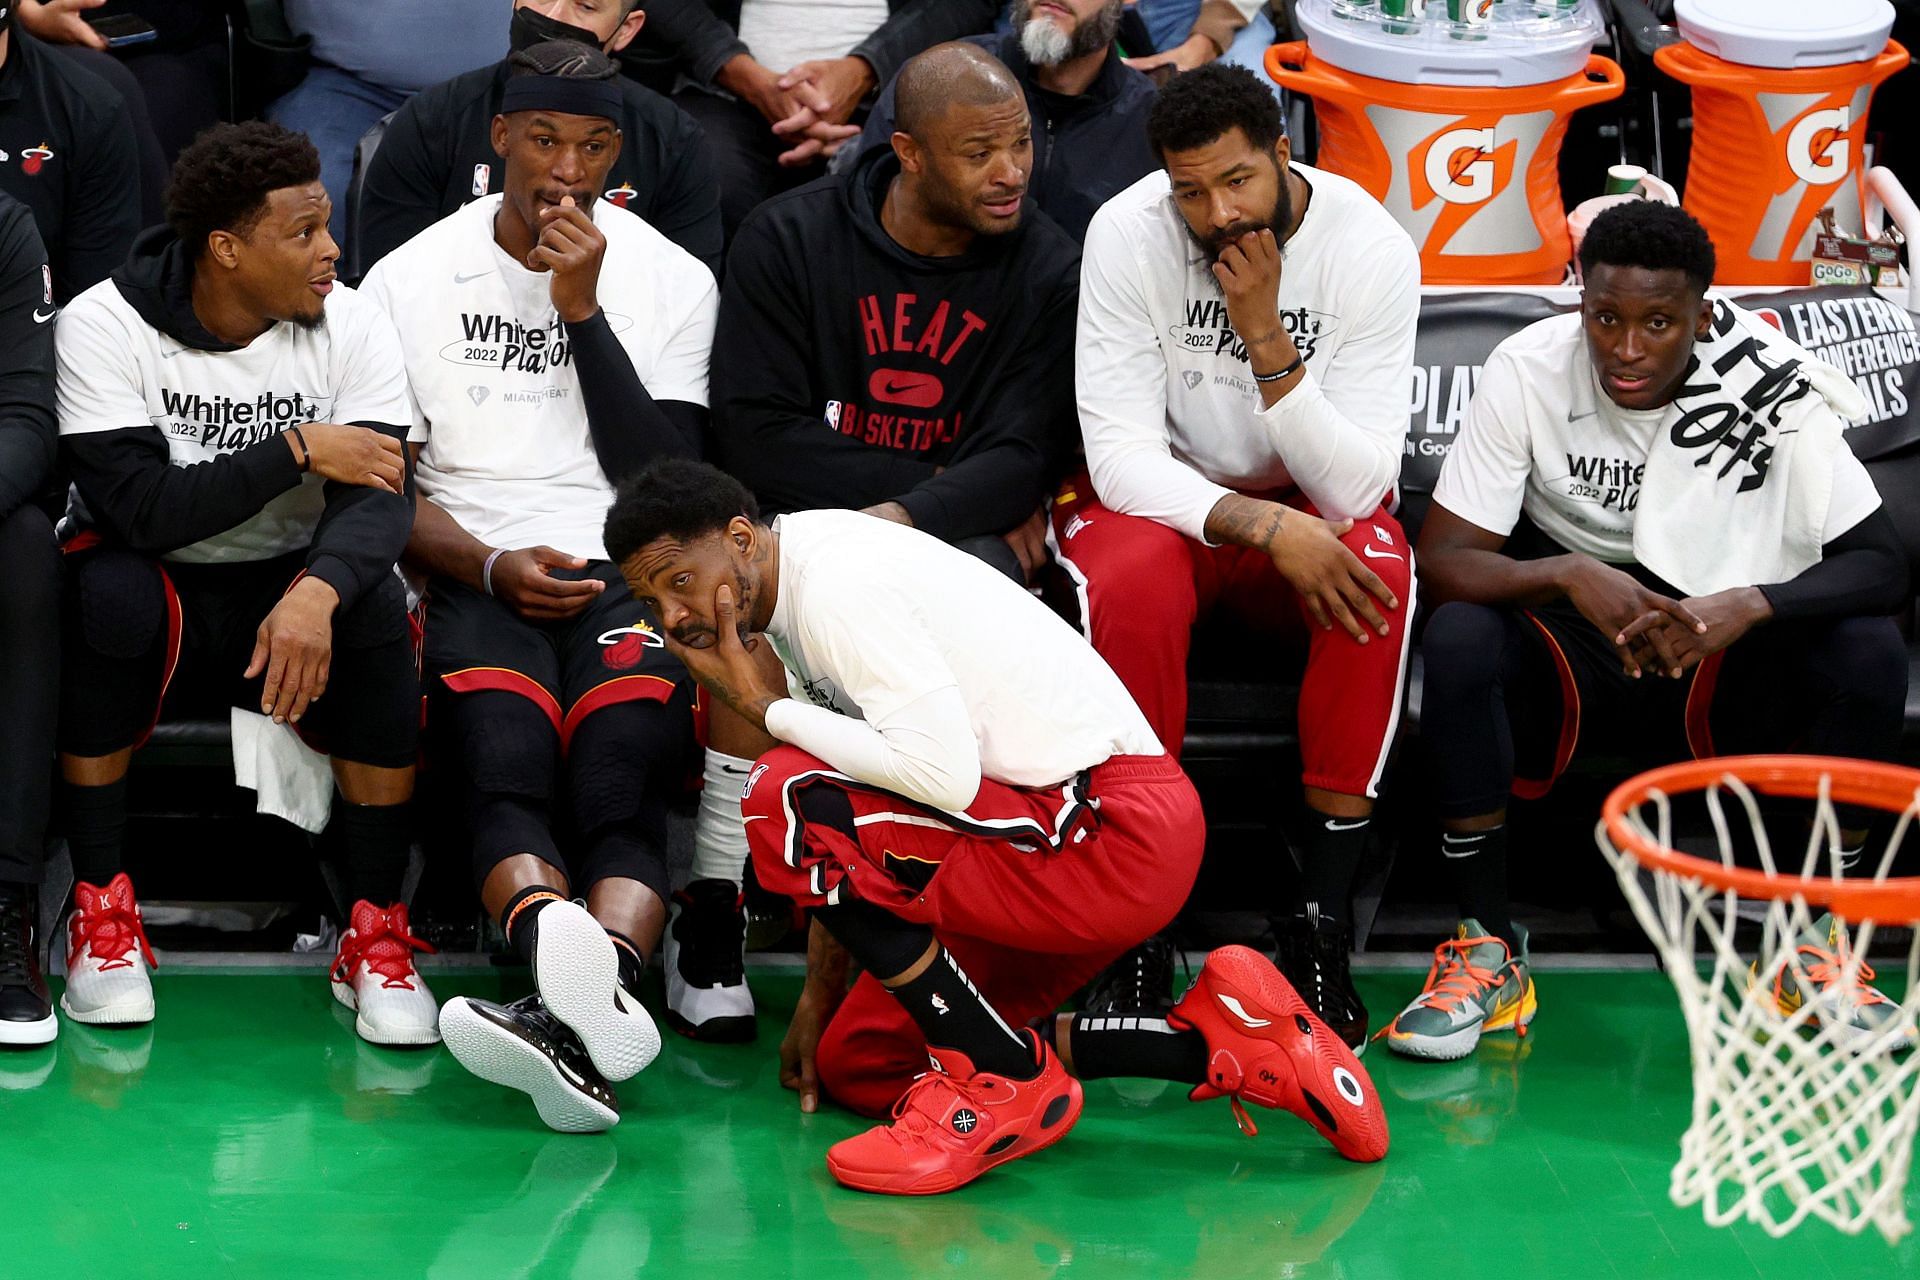 Miami Heat players on the bench in Game 4 of the ECF